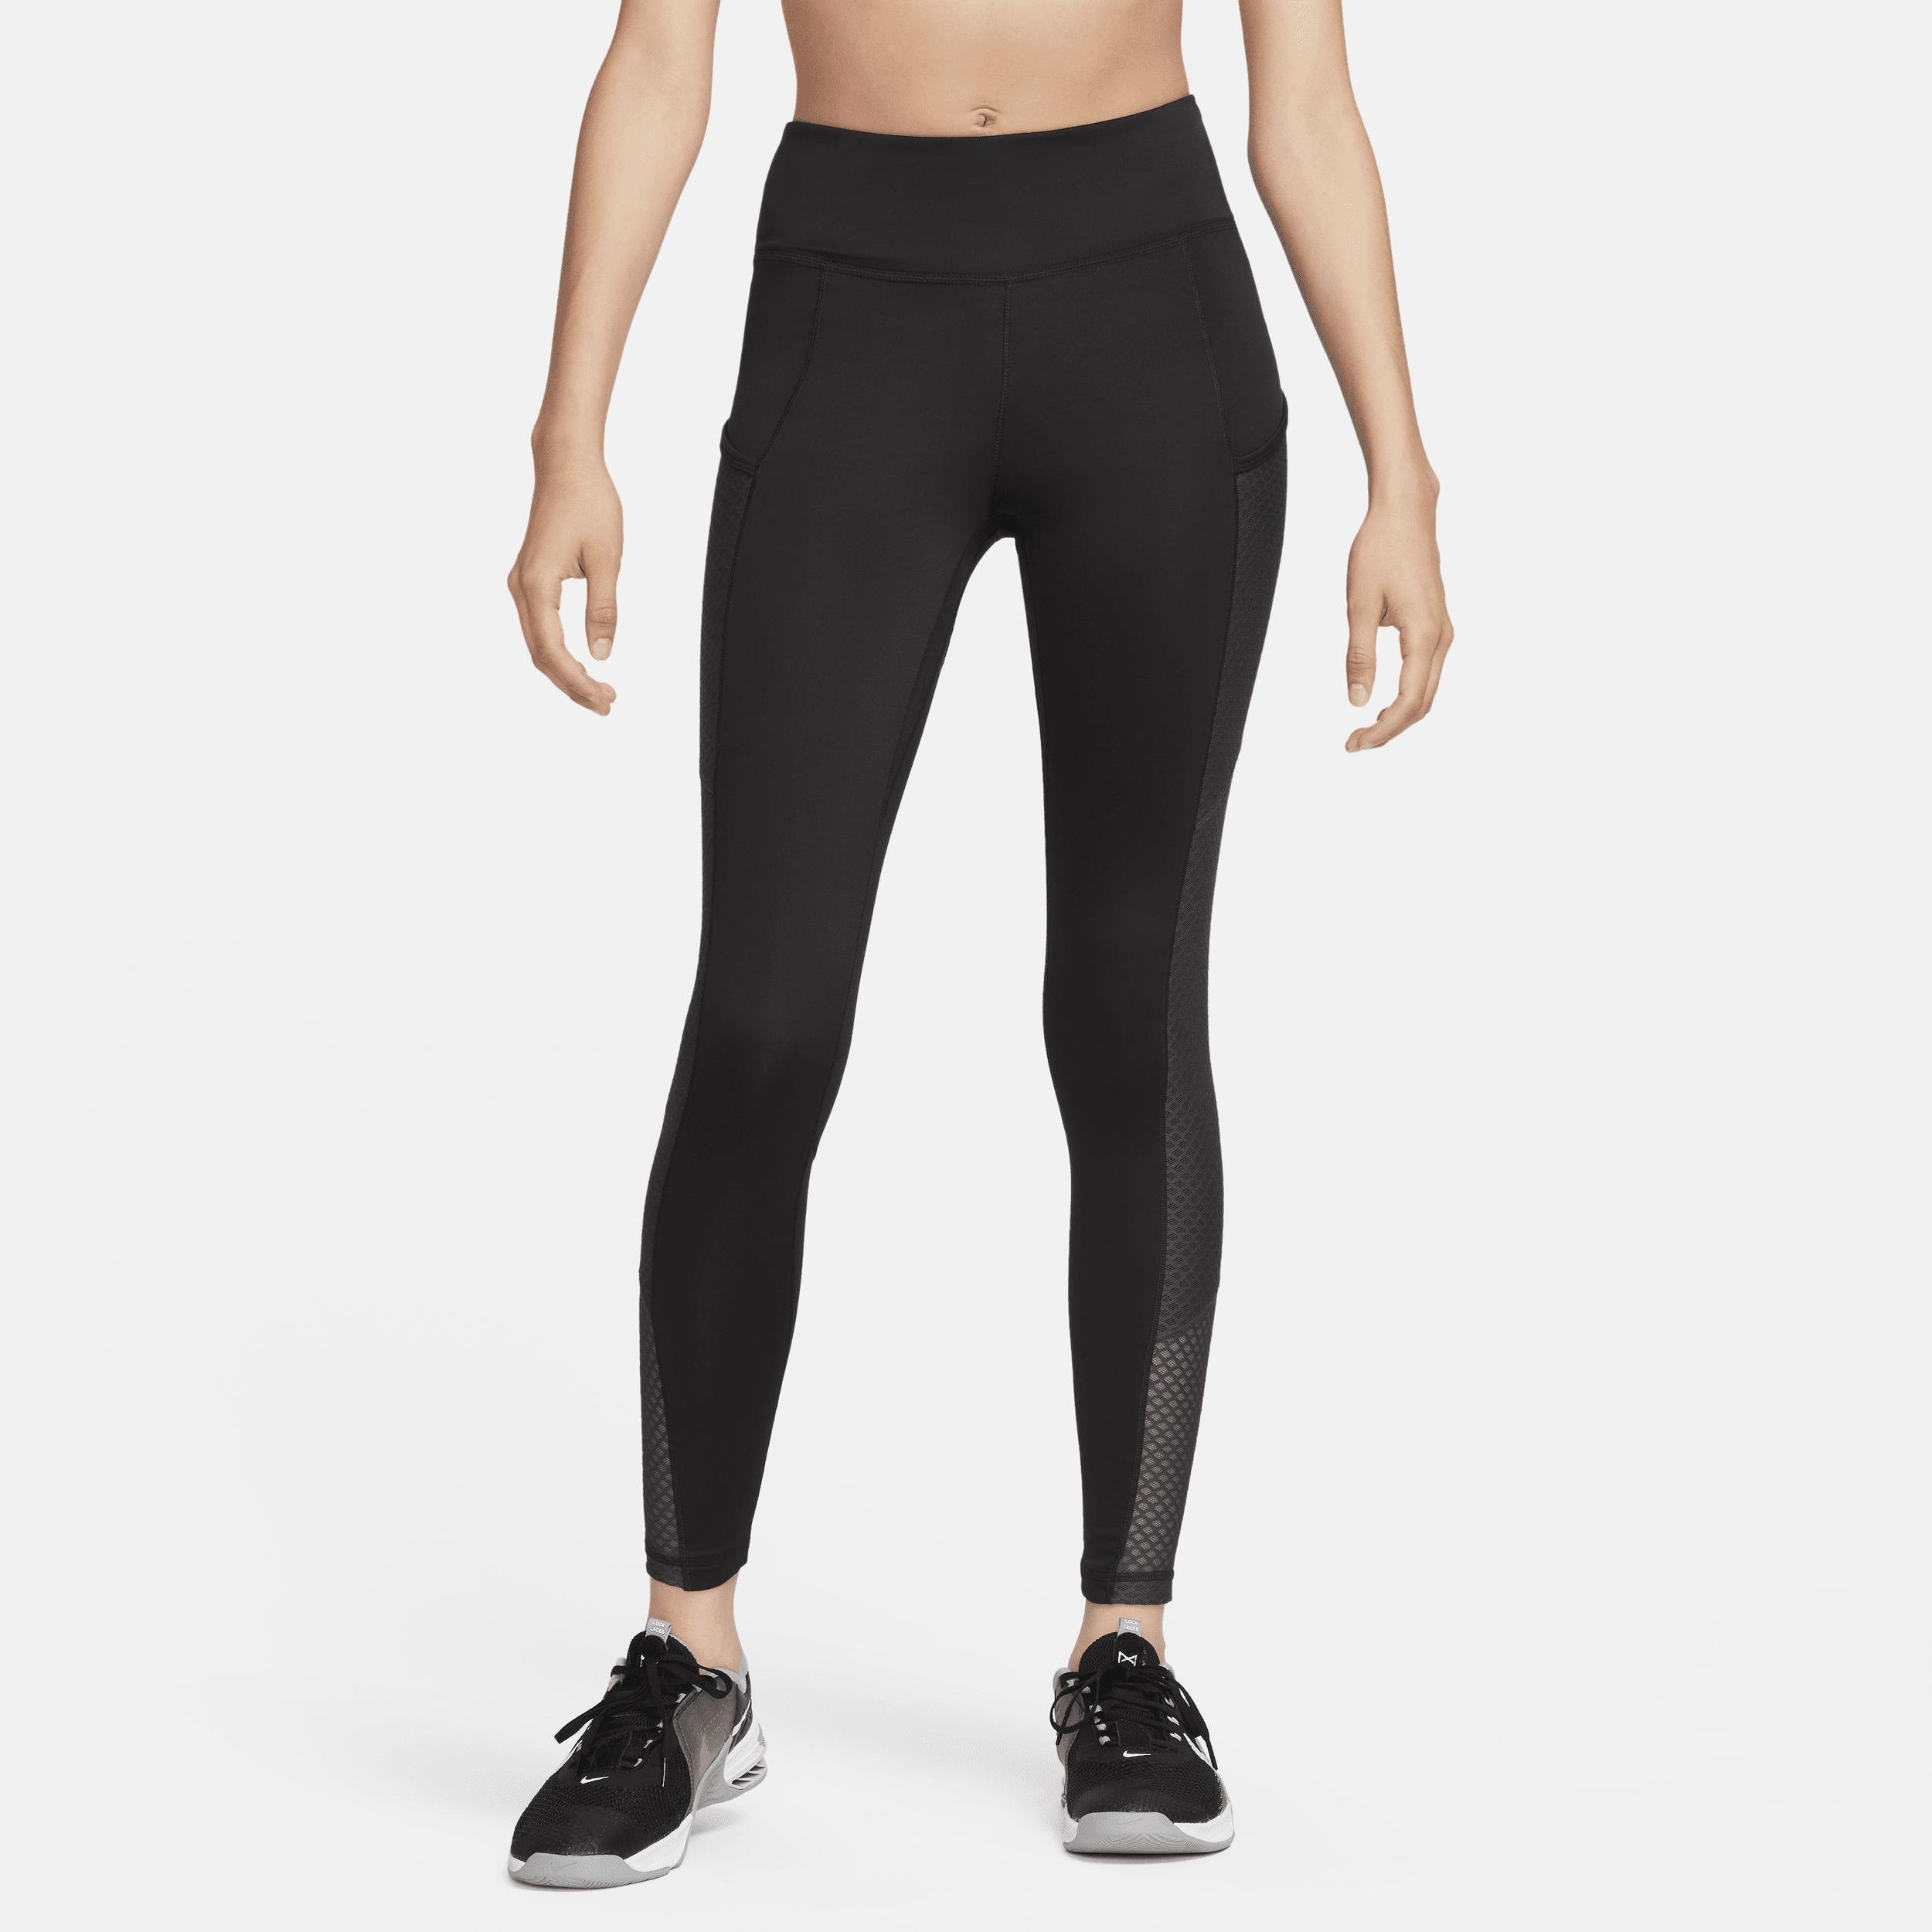 Nike Women's Therma-FIT One Mid-Rise Full-Length Training Leggings with Pockets by NIKE